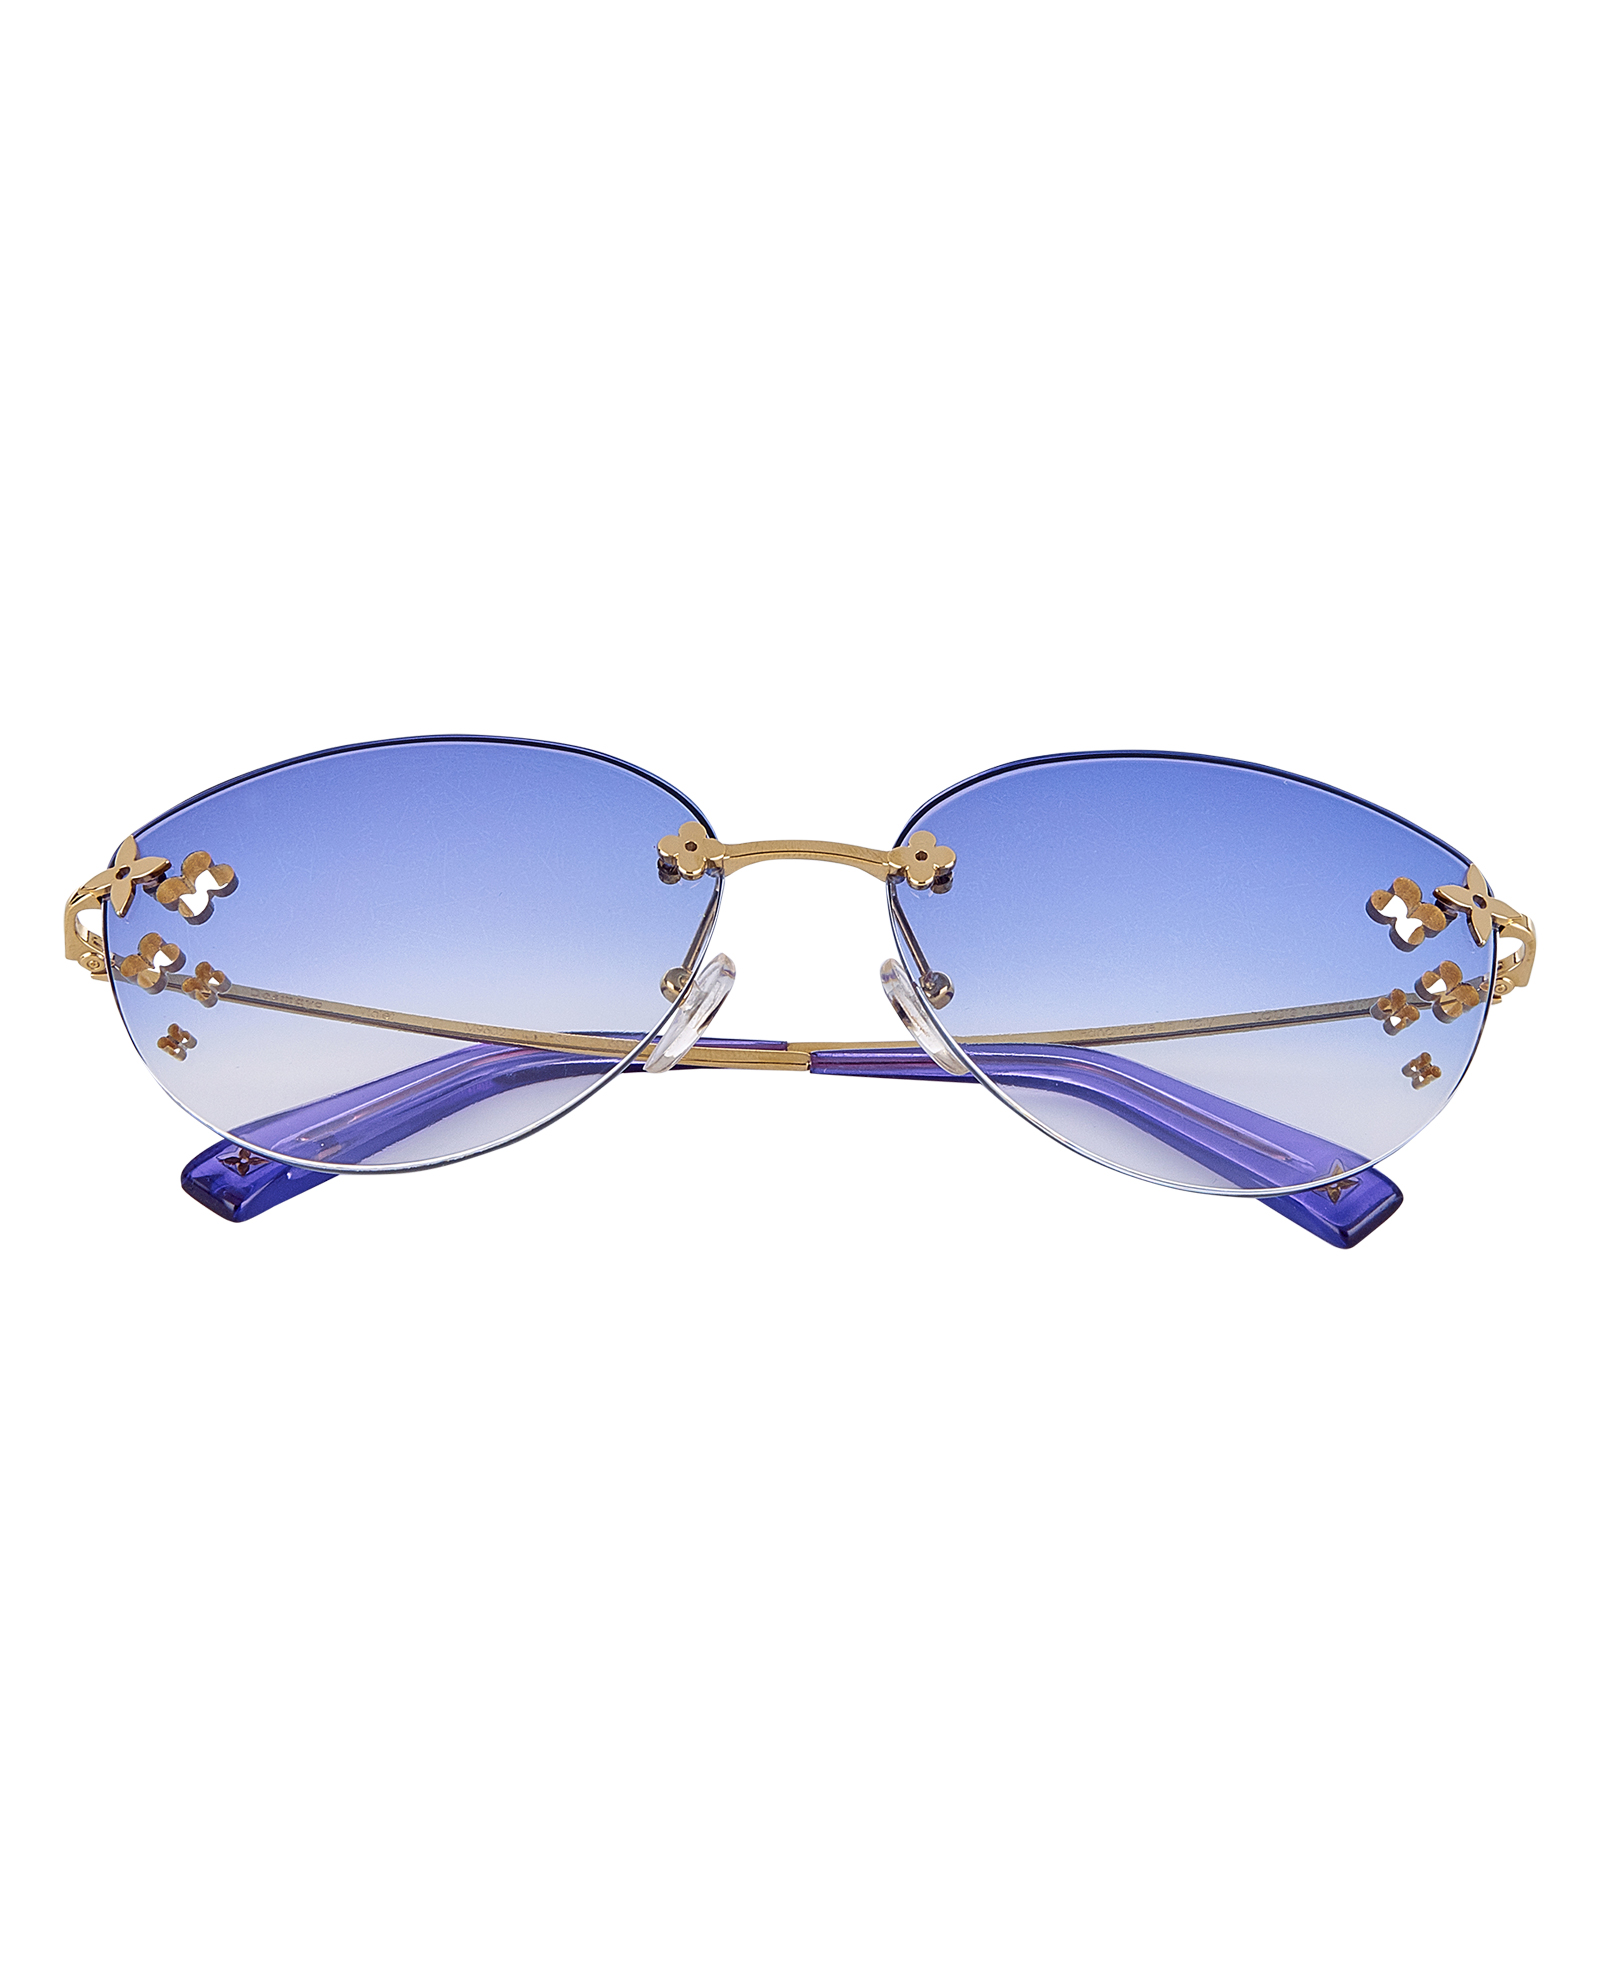 LOUIS VUITTON Sonnenbrille DESMAYO. — catalog Privately owned luxury -  jewelry, fashion, luxury accessories